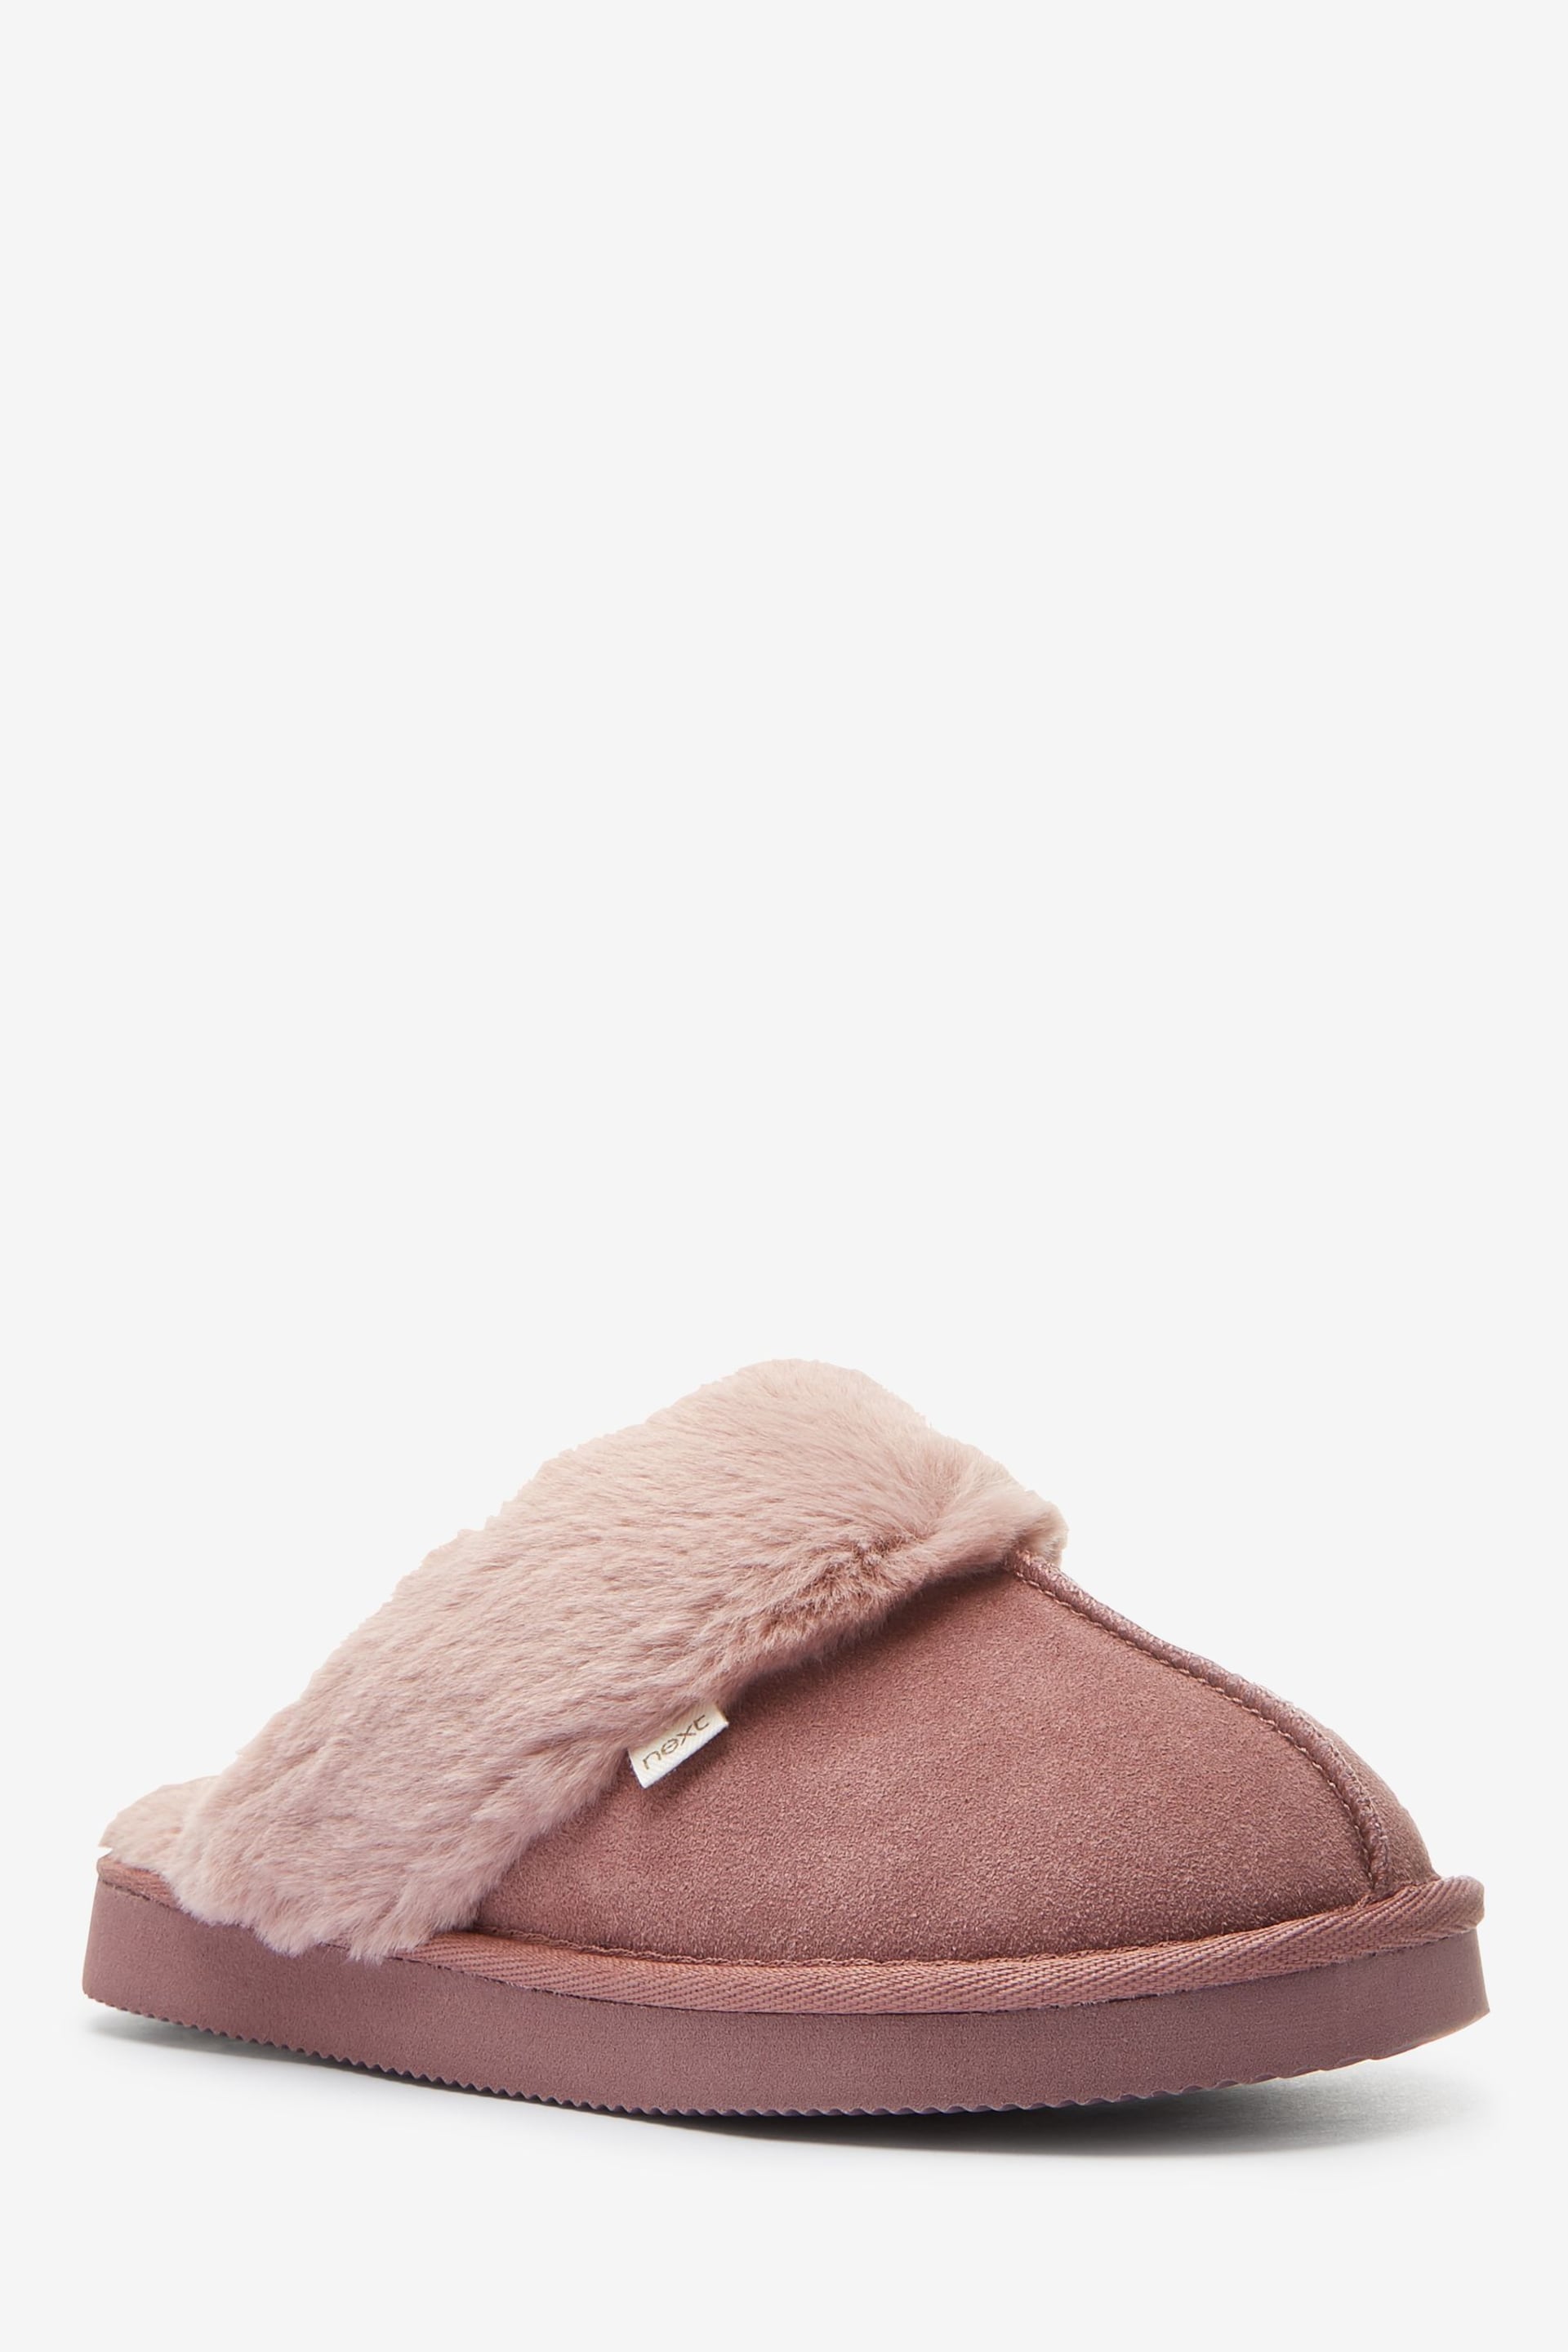 Mink Pink Suede Faux Fur Lined Mule Slippers - Image 4 of 6